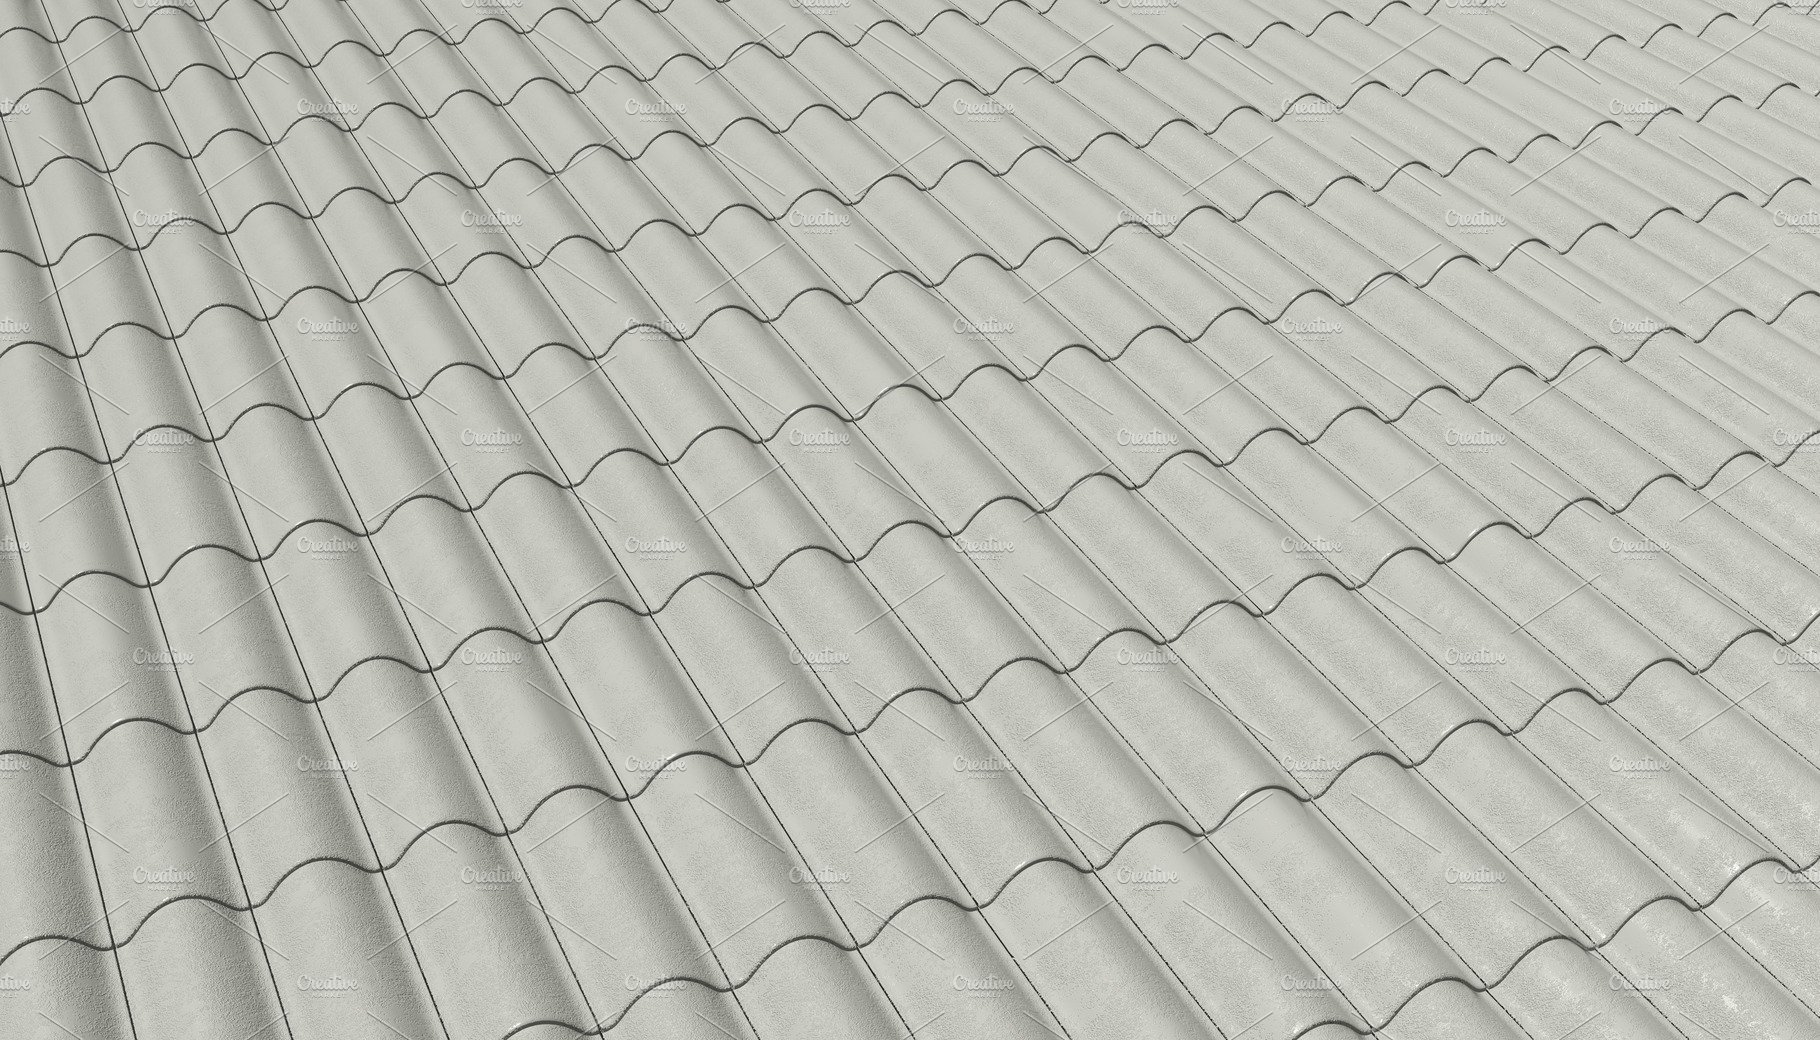 Top view of white double corrugated tiles on roof home or house cover image.